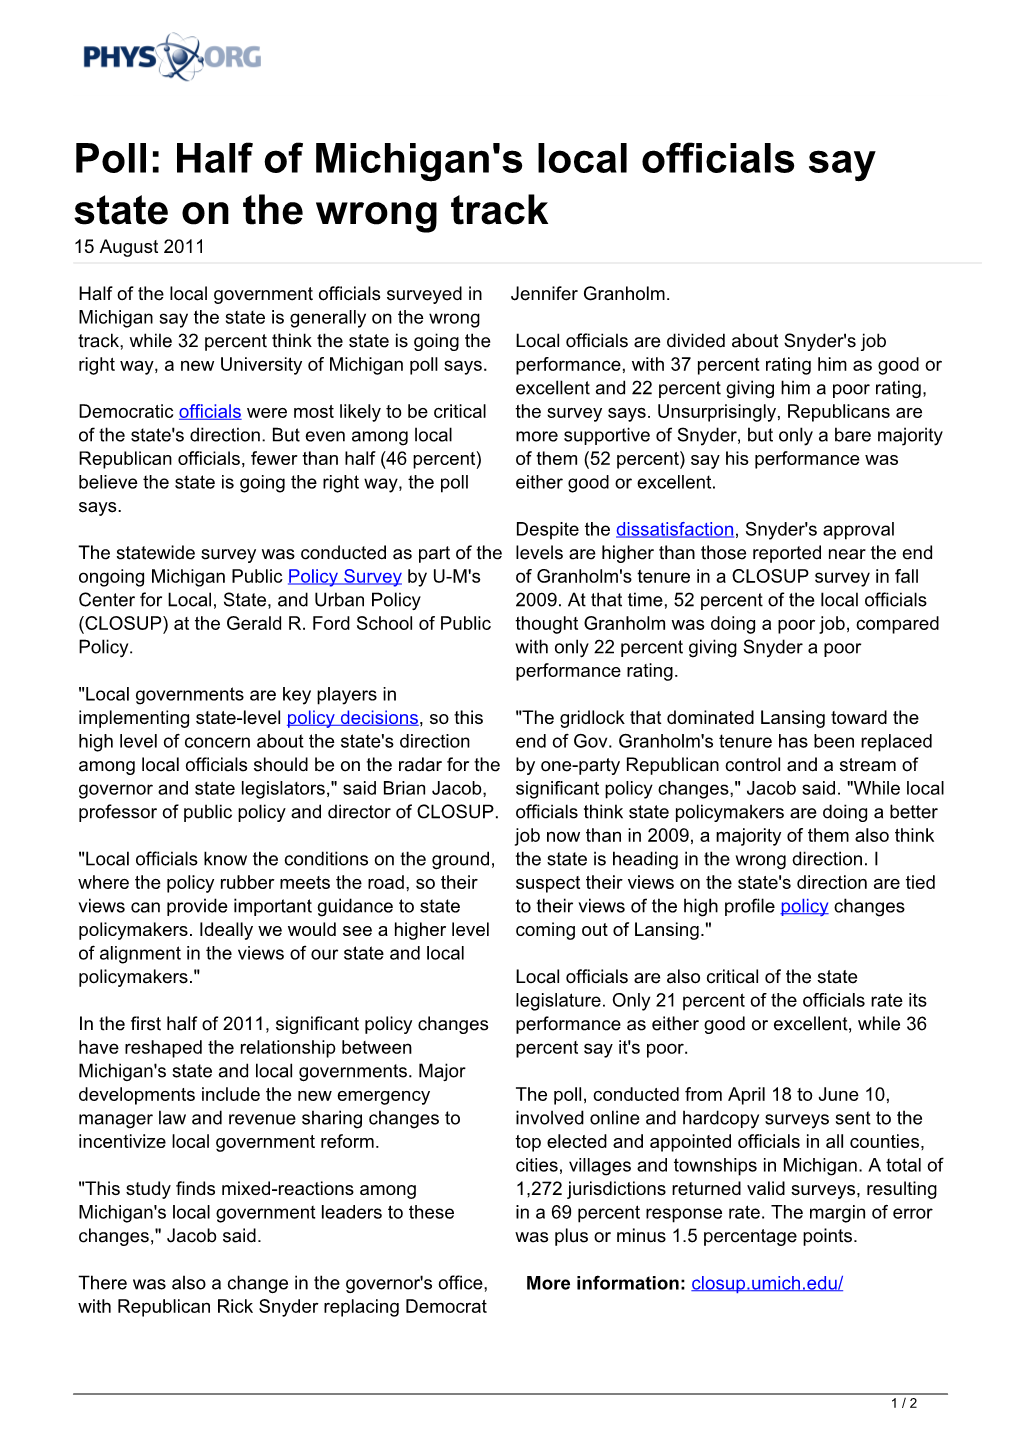 Half of Michigan's Local Officials Say State on the Wrong Track 15 August 2011